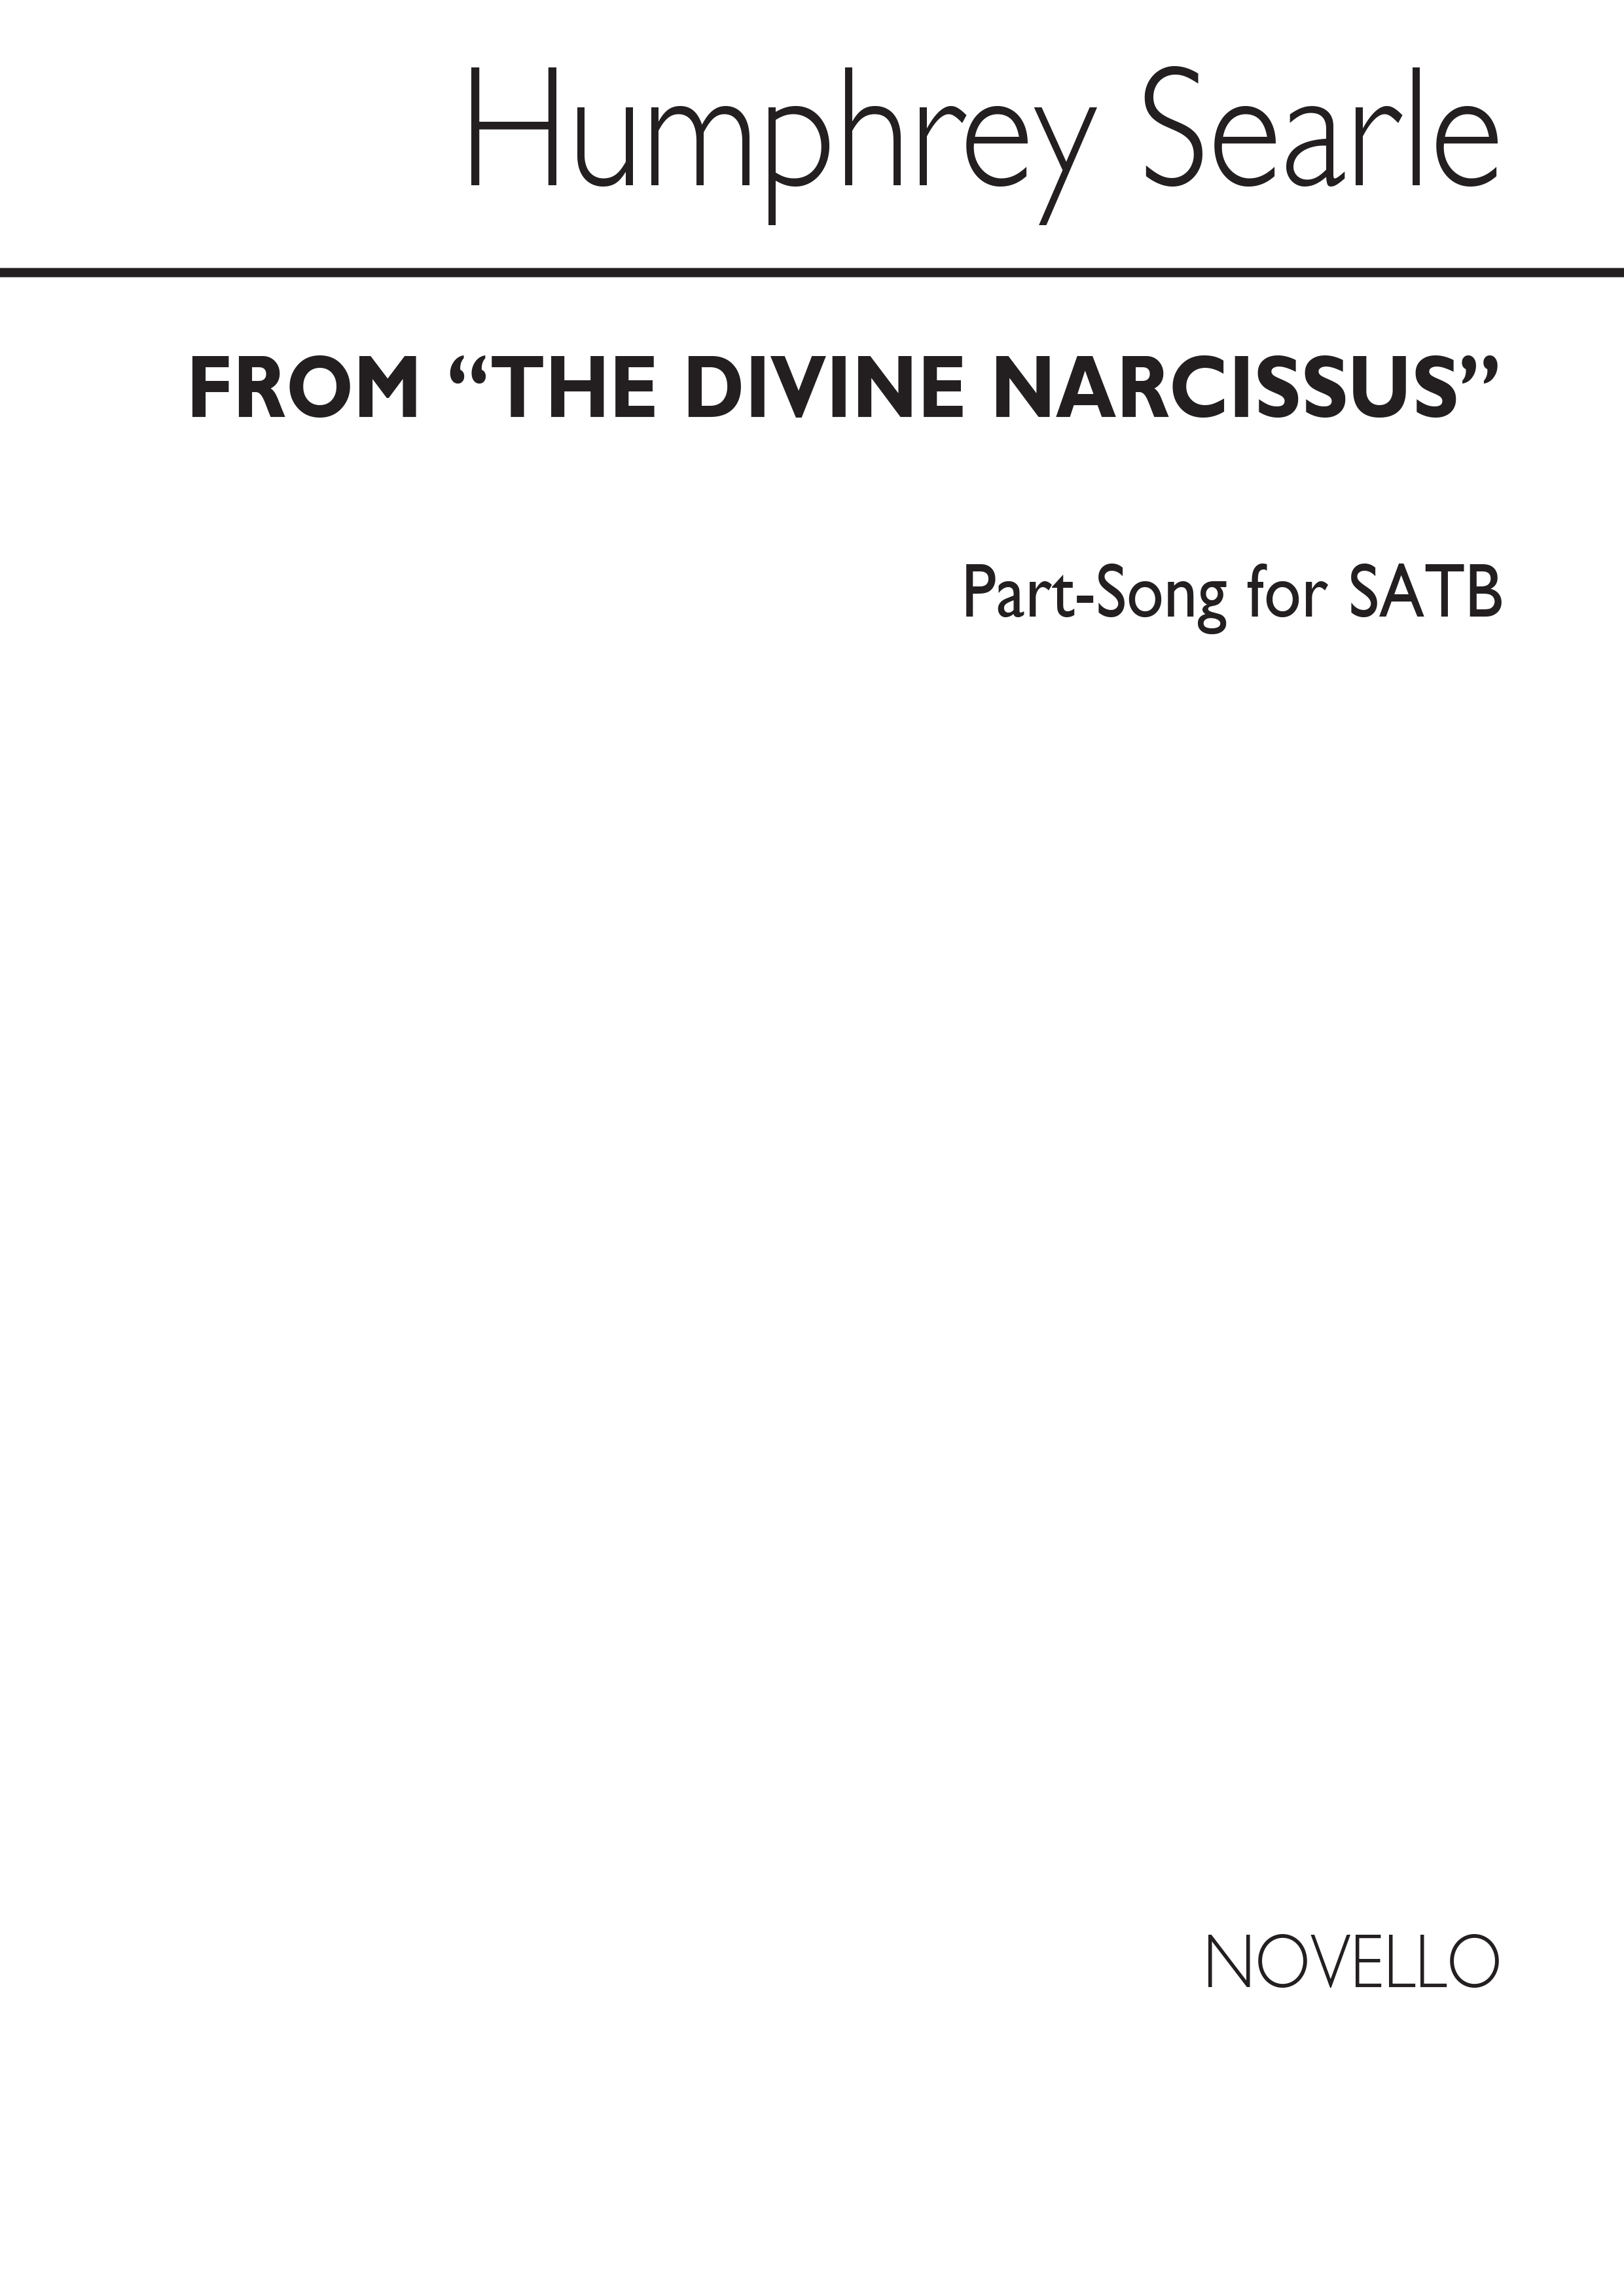 Humphrey Searle: From The Divine Narcissus for SATB Chorus: SATB: Vocal Score